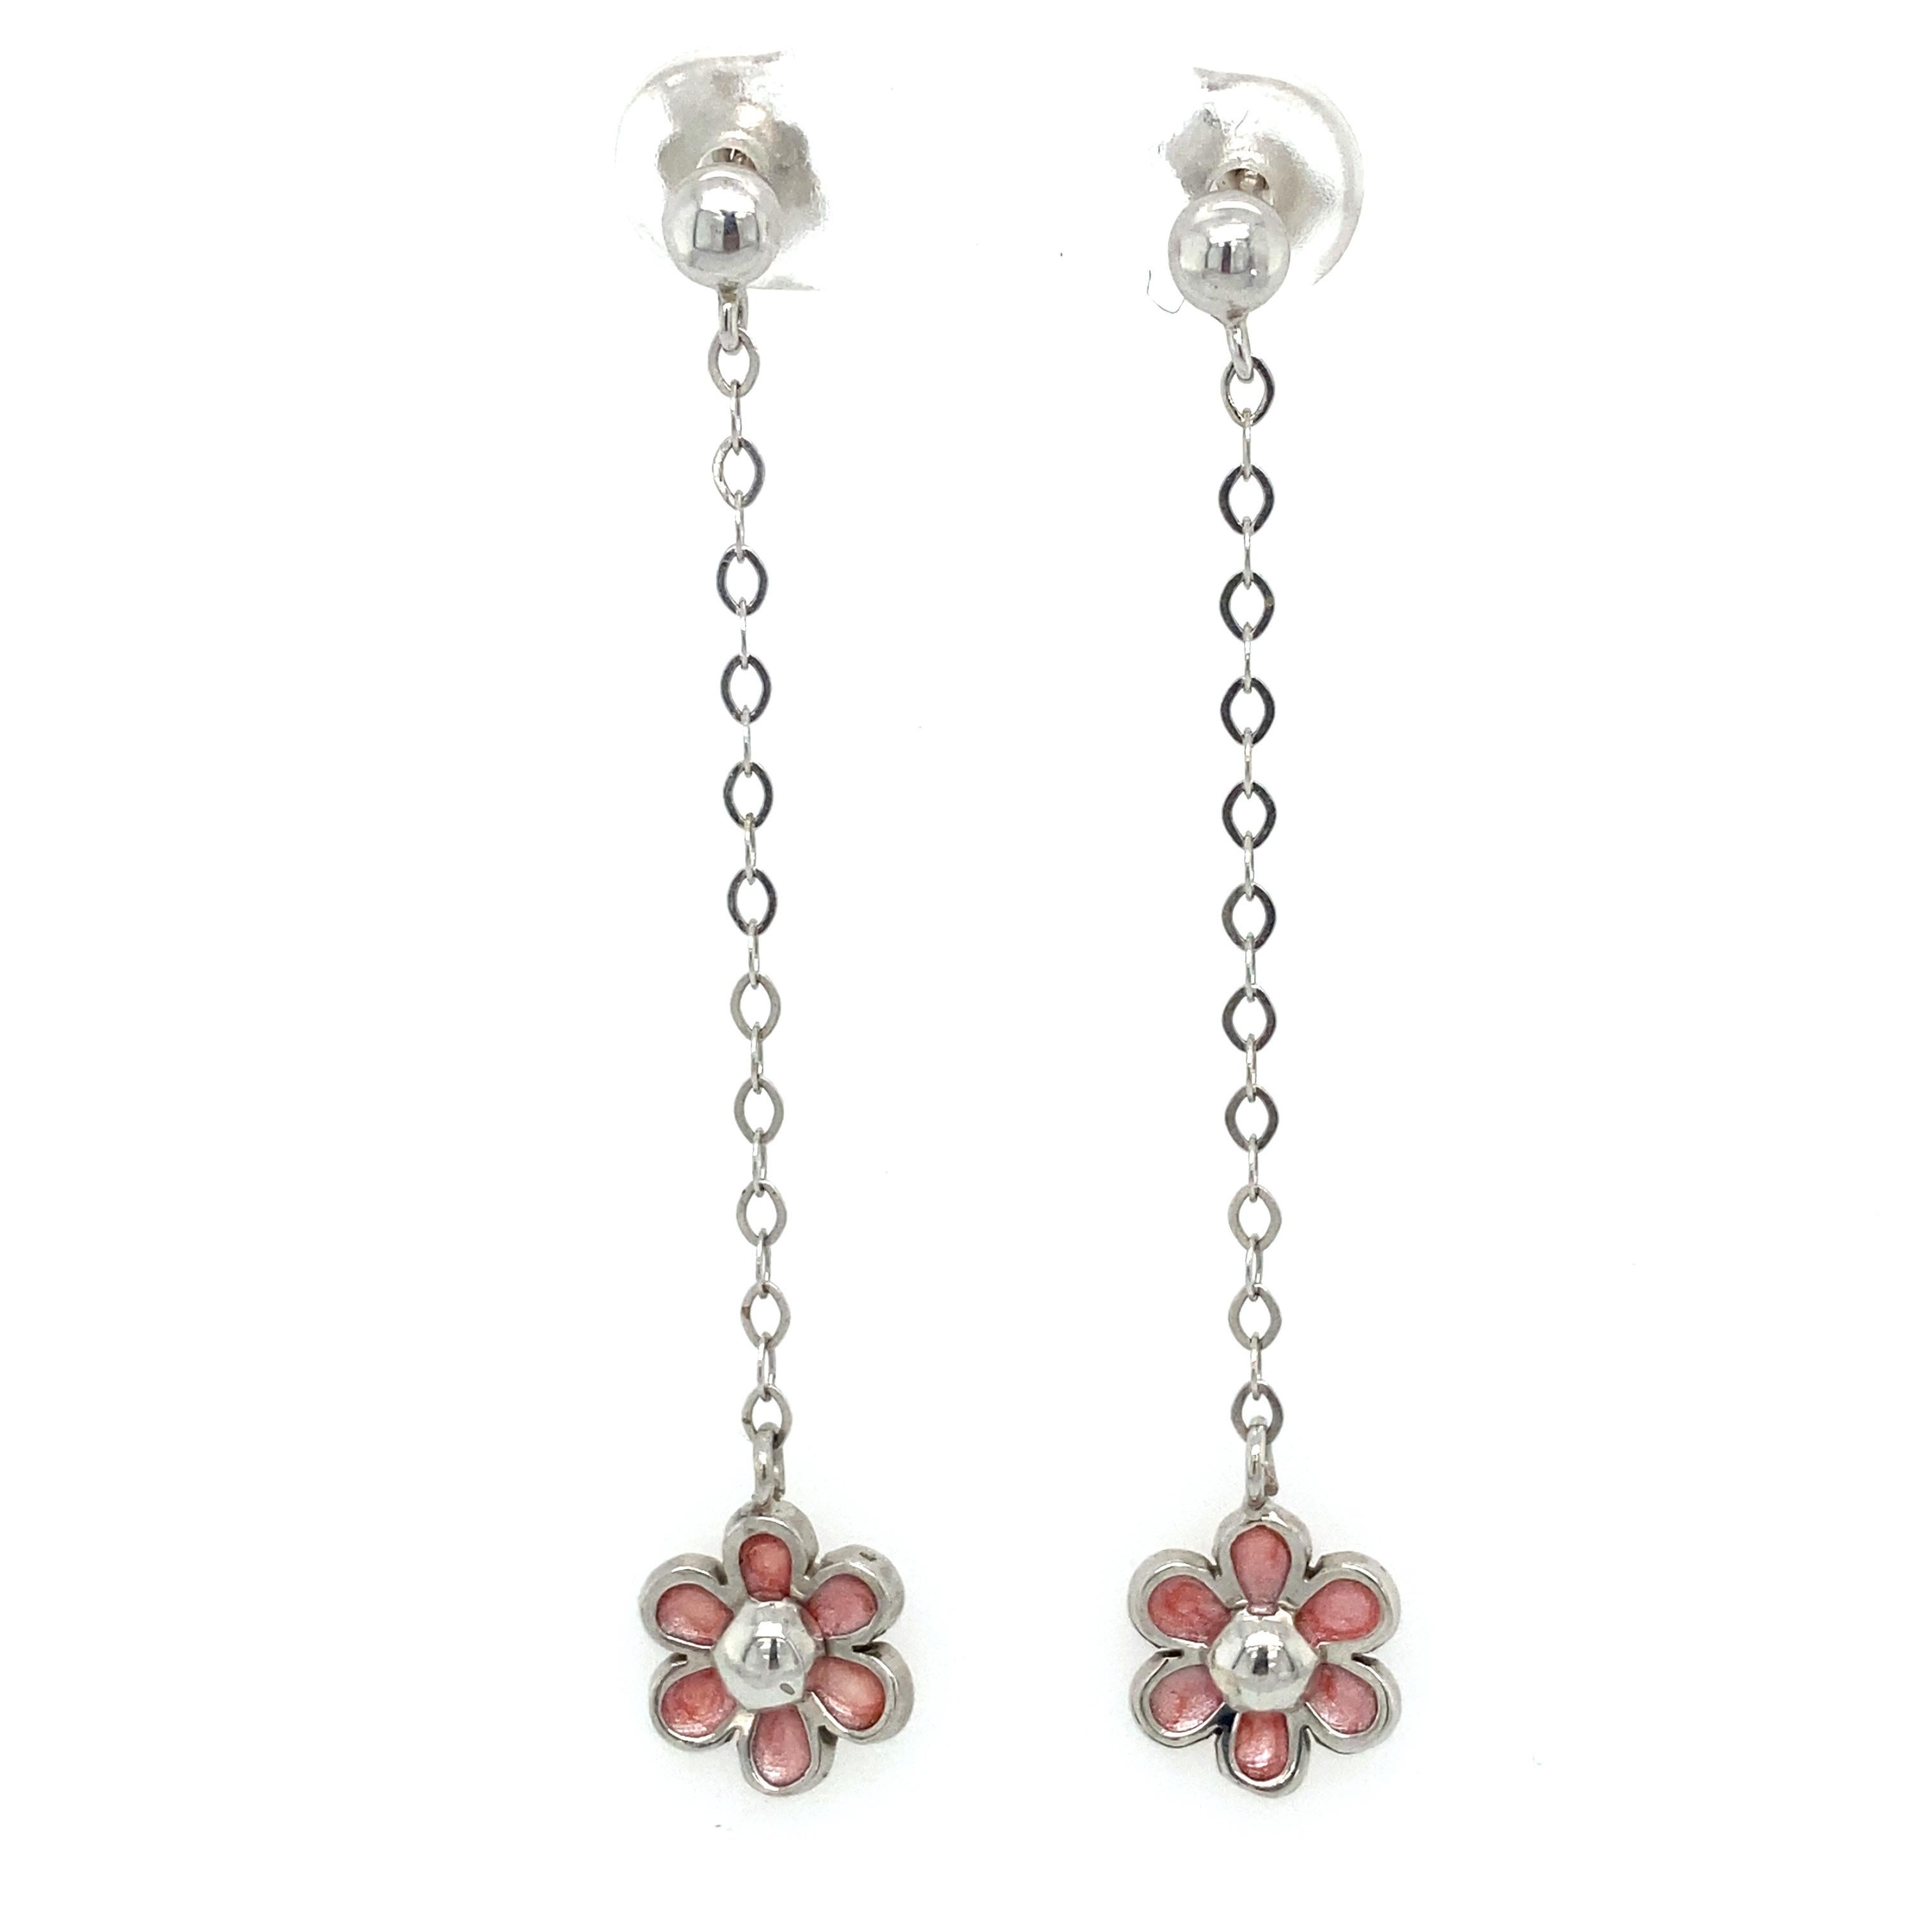 Item Details: These dainty drop earrings have flower drops with pink enamel petals. 

Circa: 1990s
Metal Type: 14 Karat White Gold
Weight: 2.7 grams
Size: 2 inch Length